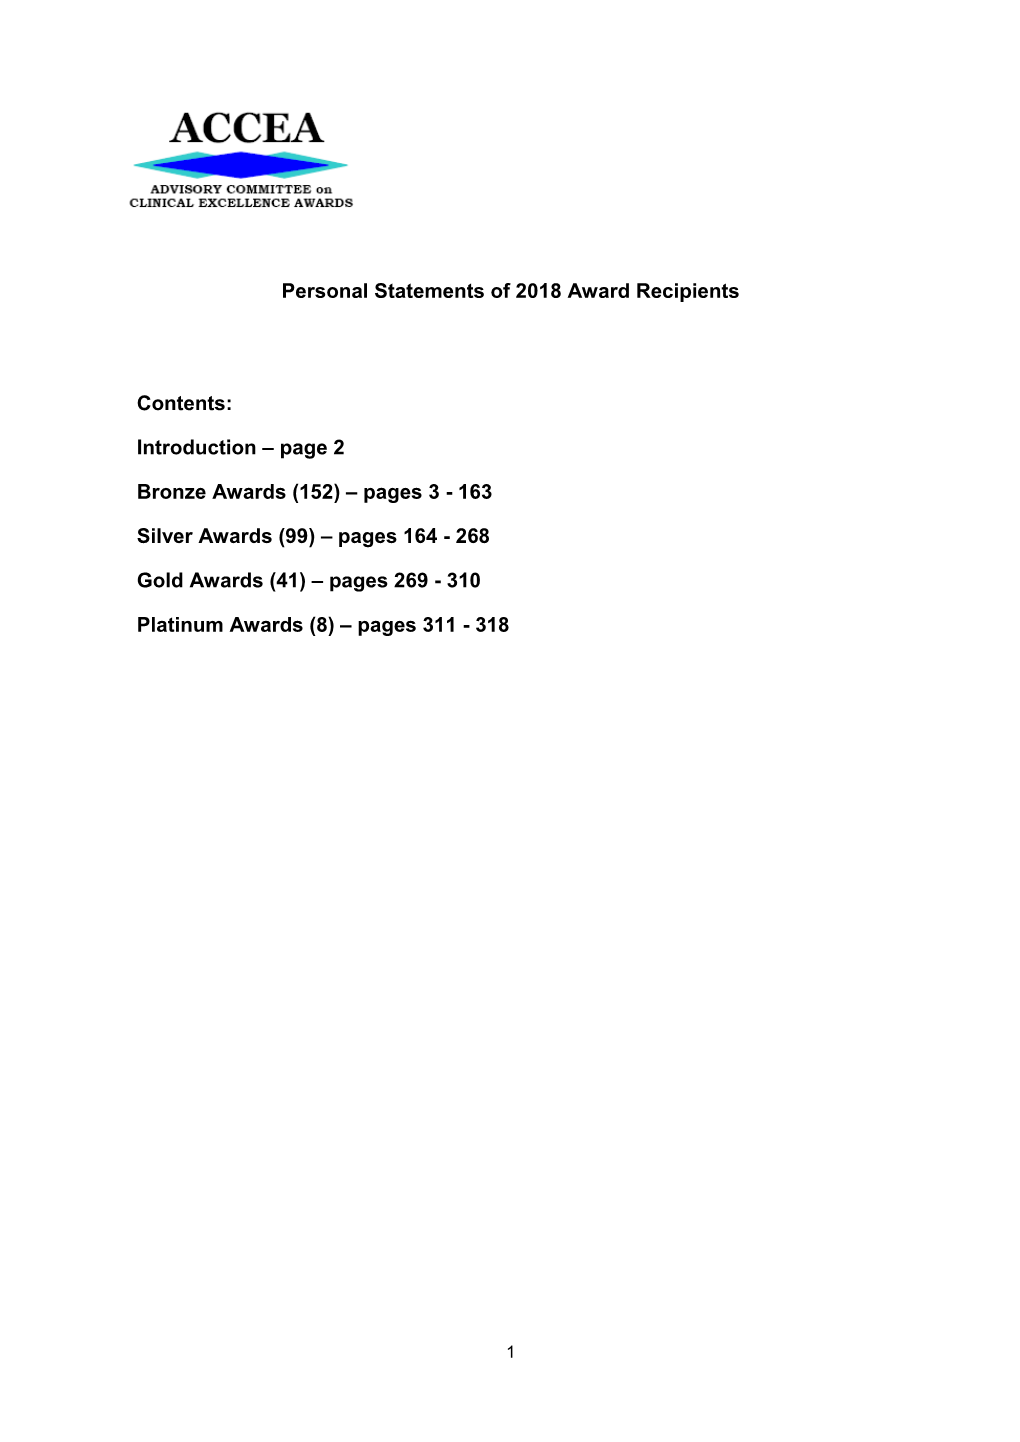 Personal Statements of 2018 Award Recipients